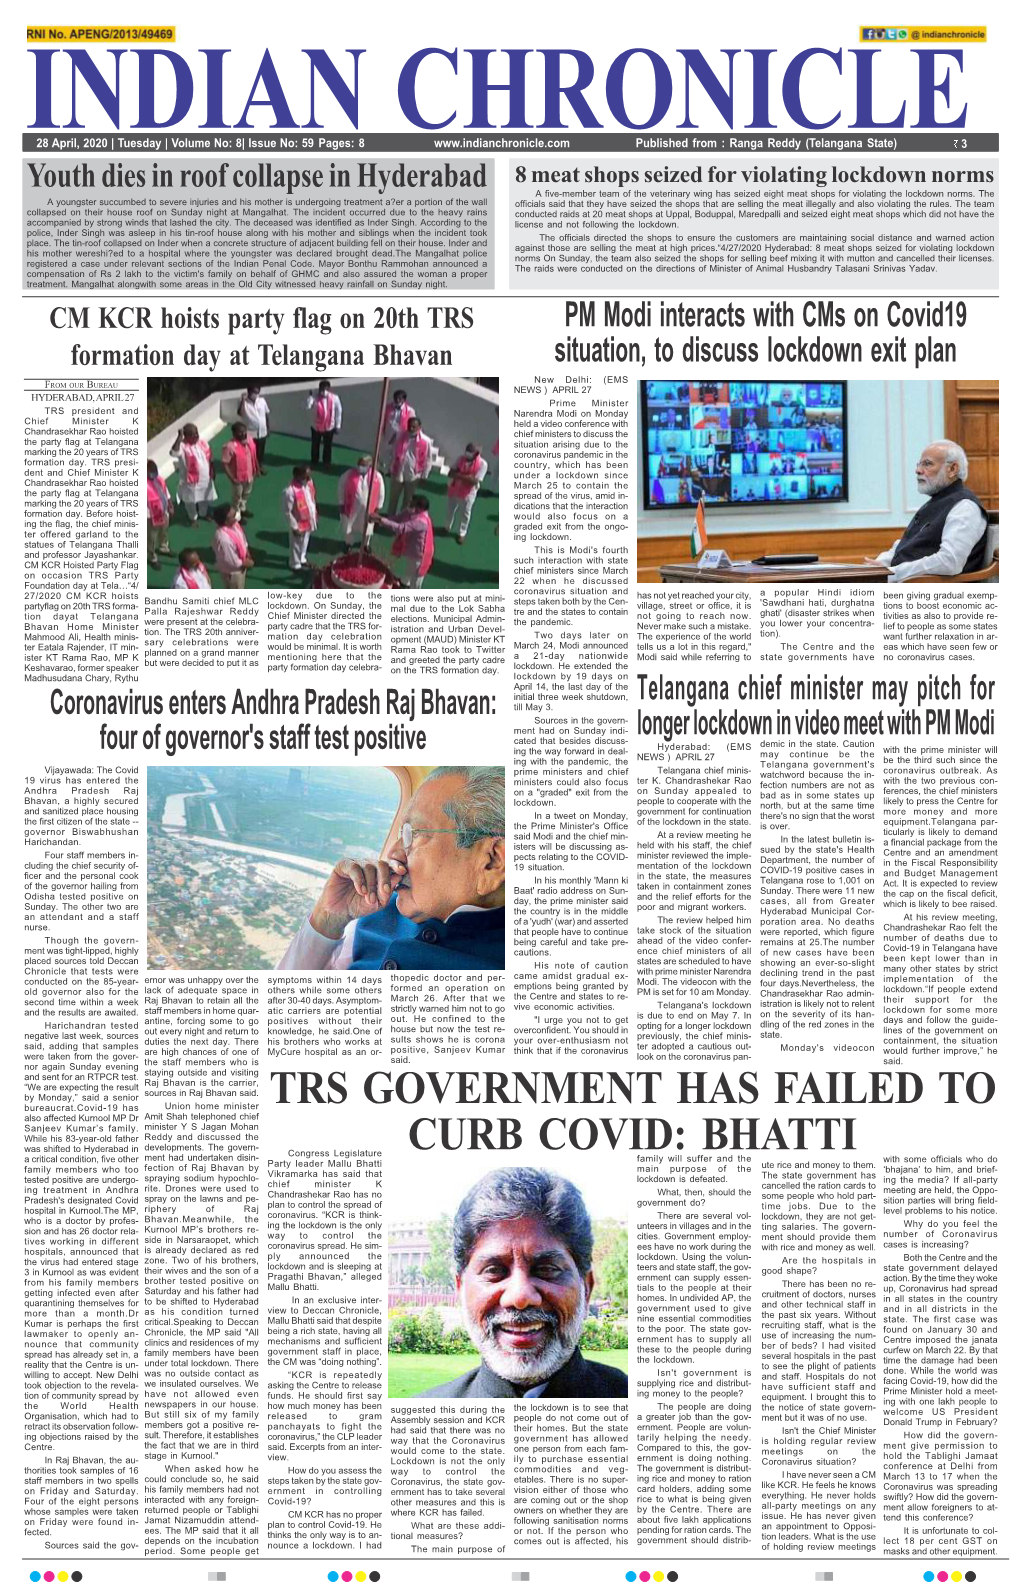 Trs Government Has Failed to Curb Covid